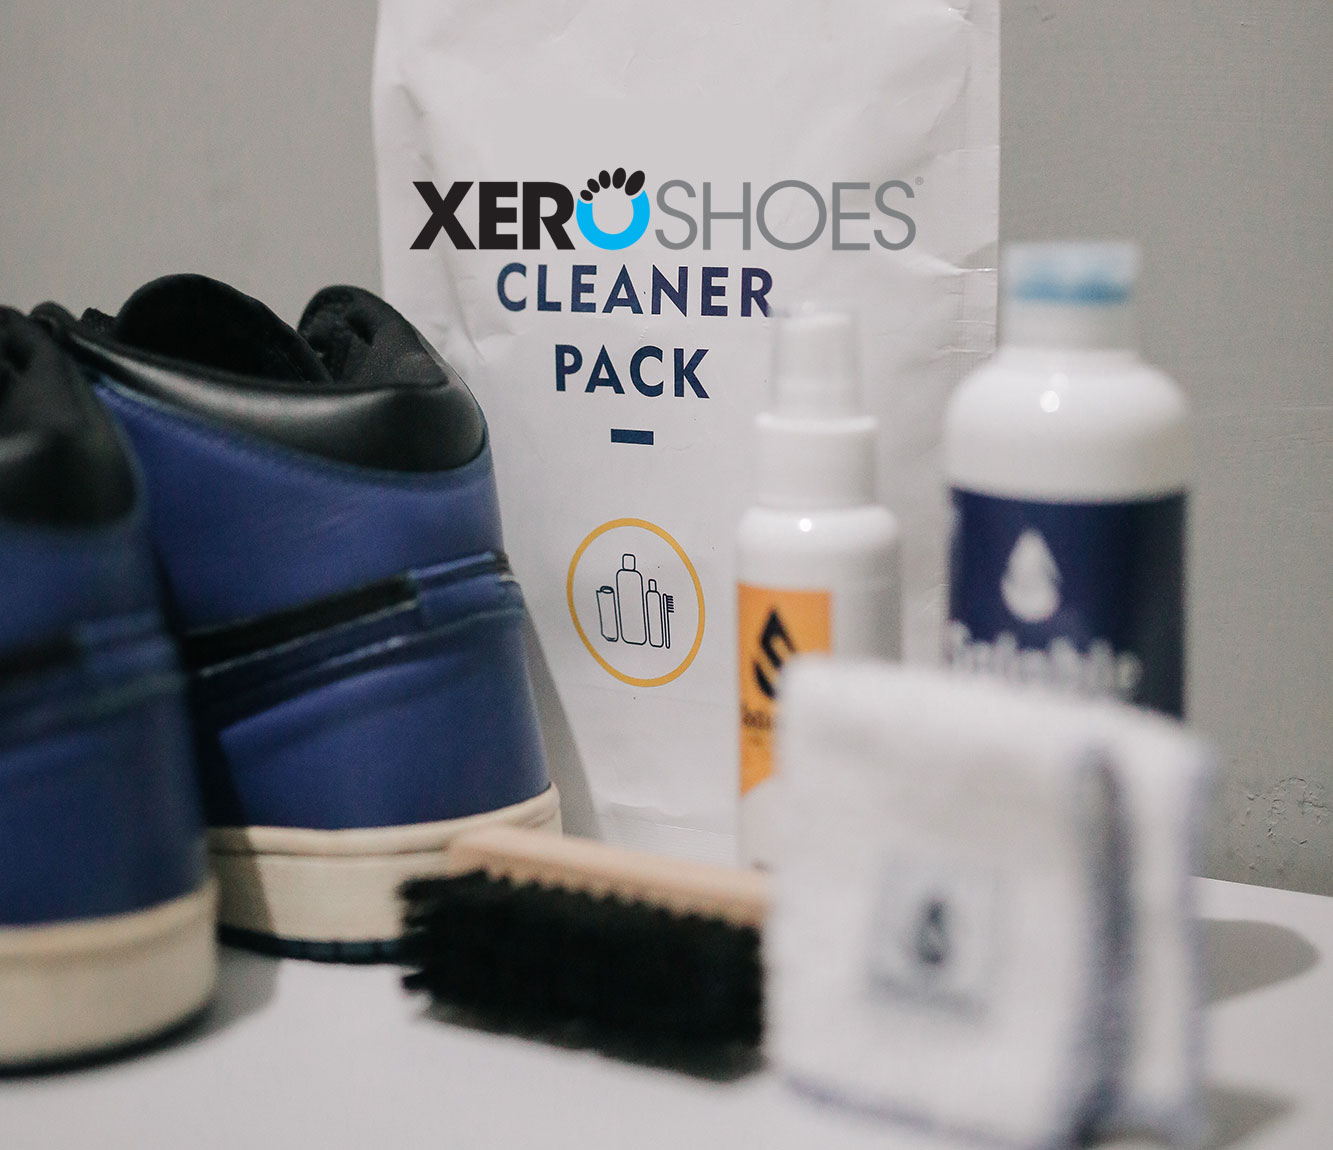 How to Clean Xero Shoes: Step-by-Step Guide - BareTread